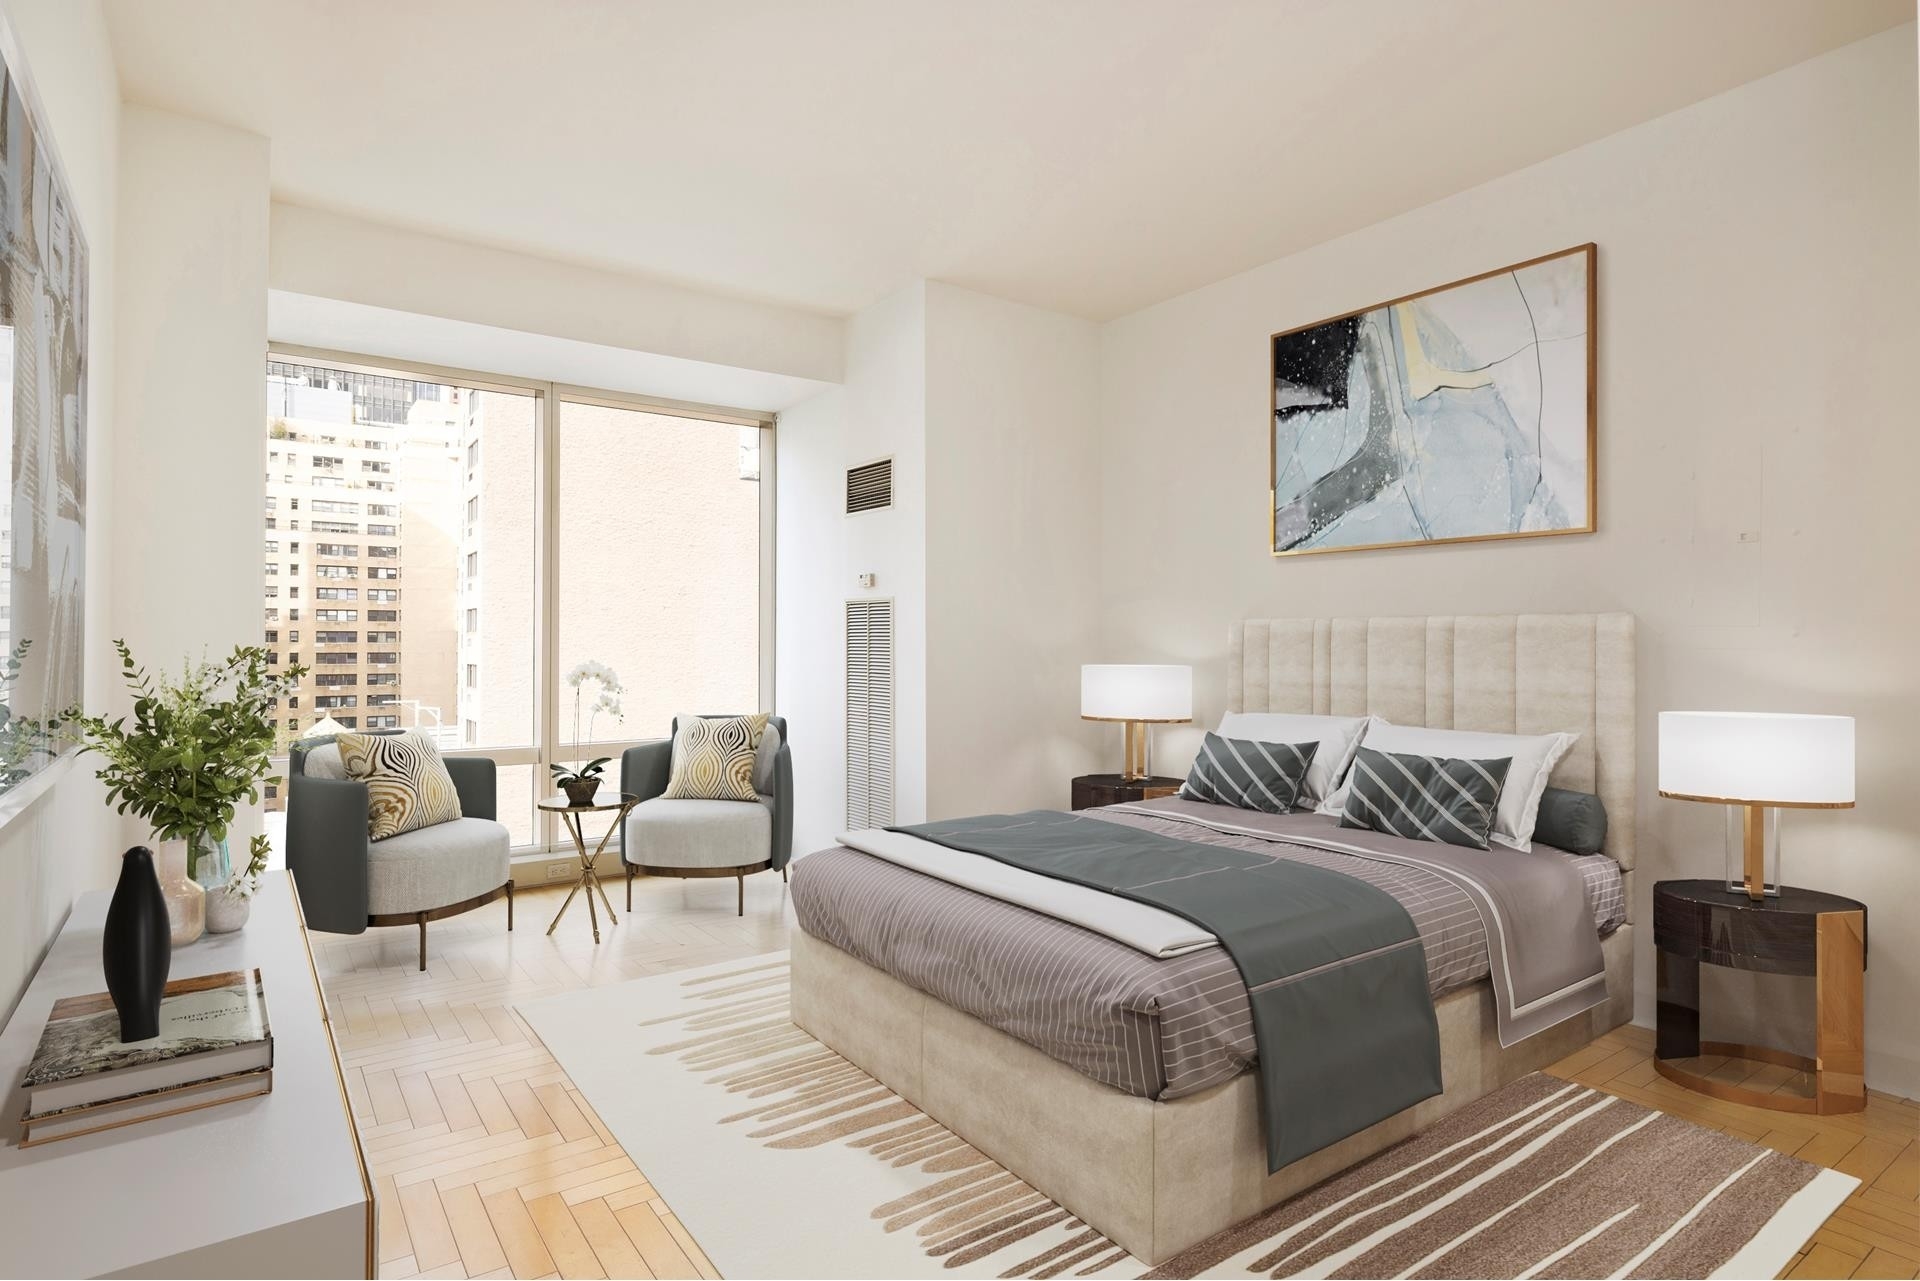 Condominium for Sale at Trump World Tower, 845 UNITED NATIONS PLZ, 11F Turtle Bay, New York, New York 10017